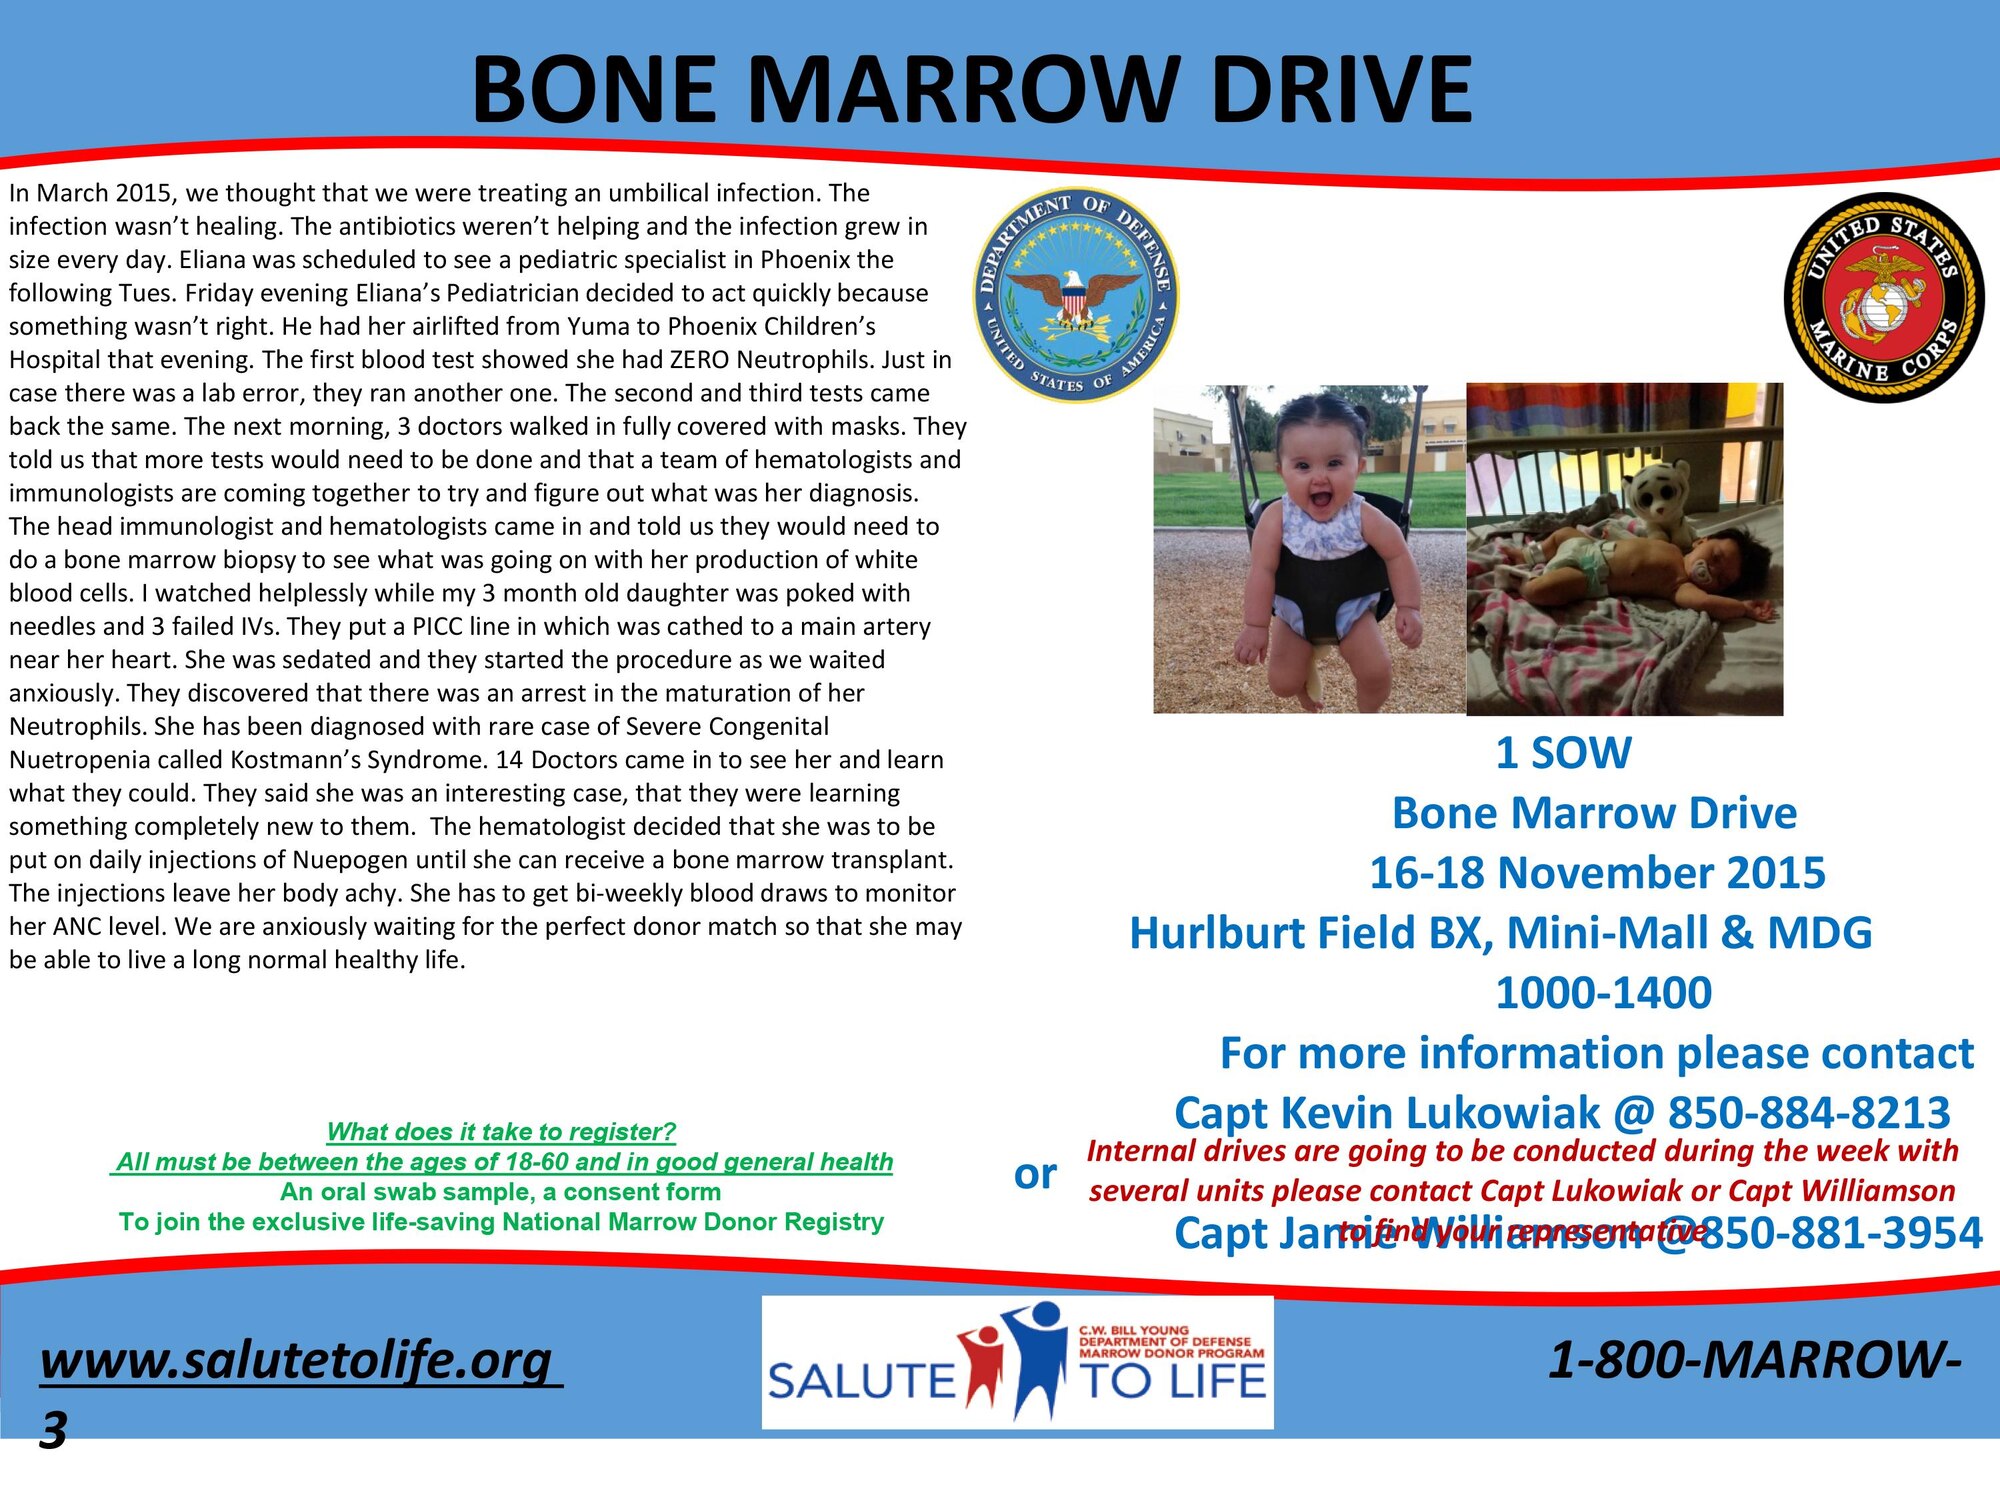 The C.W. Bill Young Department of Defense Marrow Donor Recruitment and Research Program has scheduled a bone marrow drive, here, from 10 a.m. to 2 p.m., at the Base Exchange, Mini-Mall and 1st Special Operations Medical Group, Nov. 16-18. 